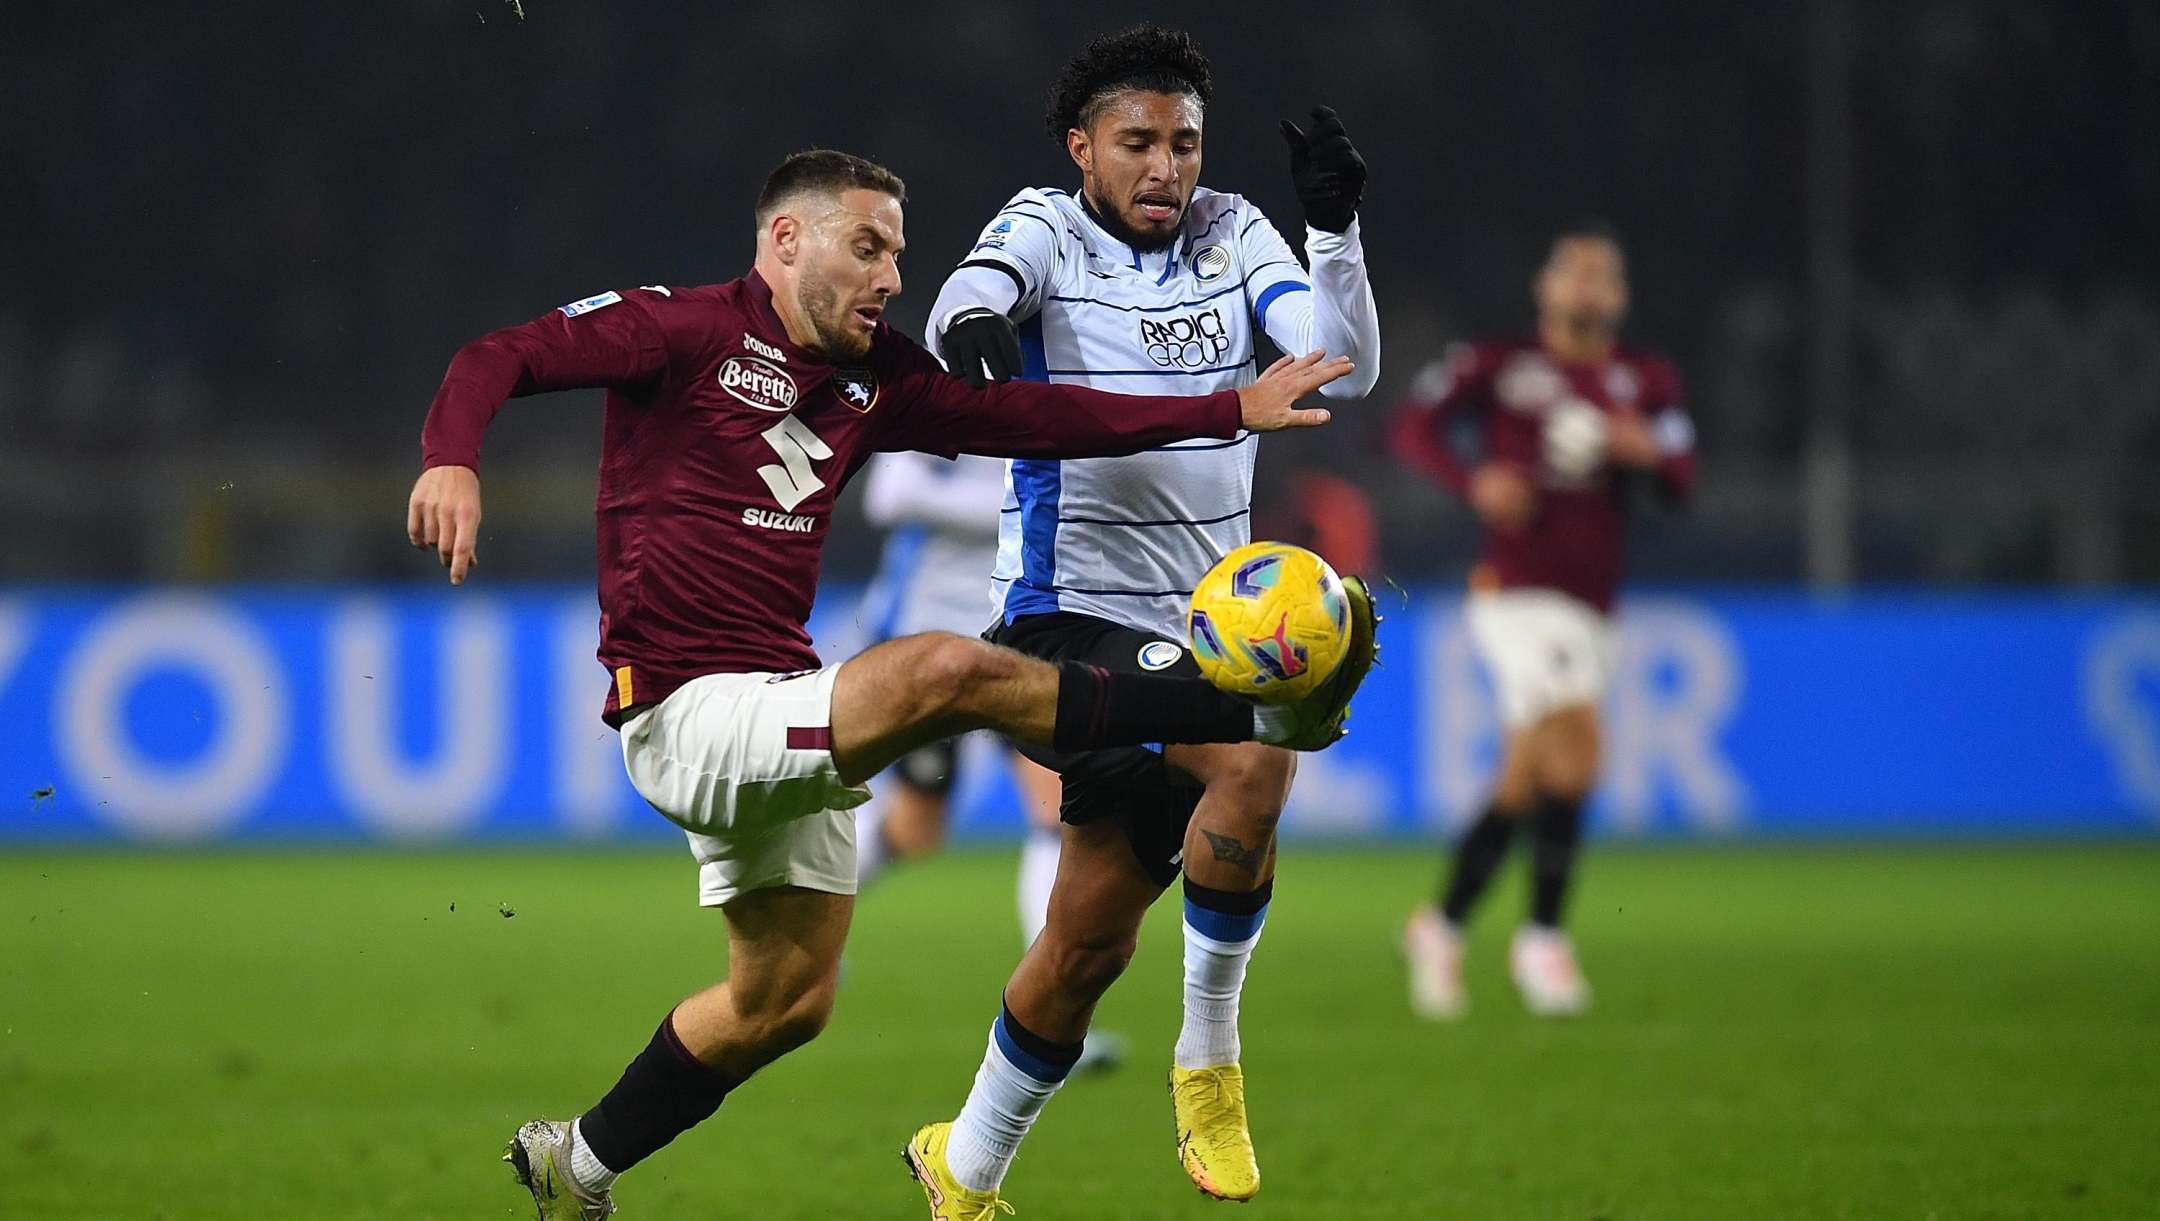 TURIN, ITALY - DECEMBER 04:  Nikola Vlasic of Torino FC is clashes with Dos Santos Ederson of Atalanta BC during the Serie A TIM match between Torino FC and Atalanta BC at Stadio Olimpico di Torino on December 4, 2023 in Turin, Italy.  (Photo by Valerio Pennicino/Getty Images)